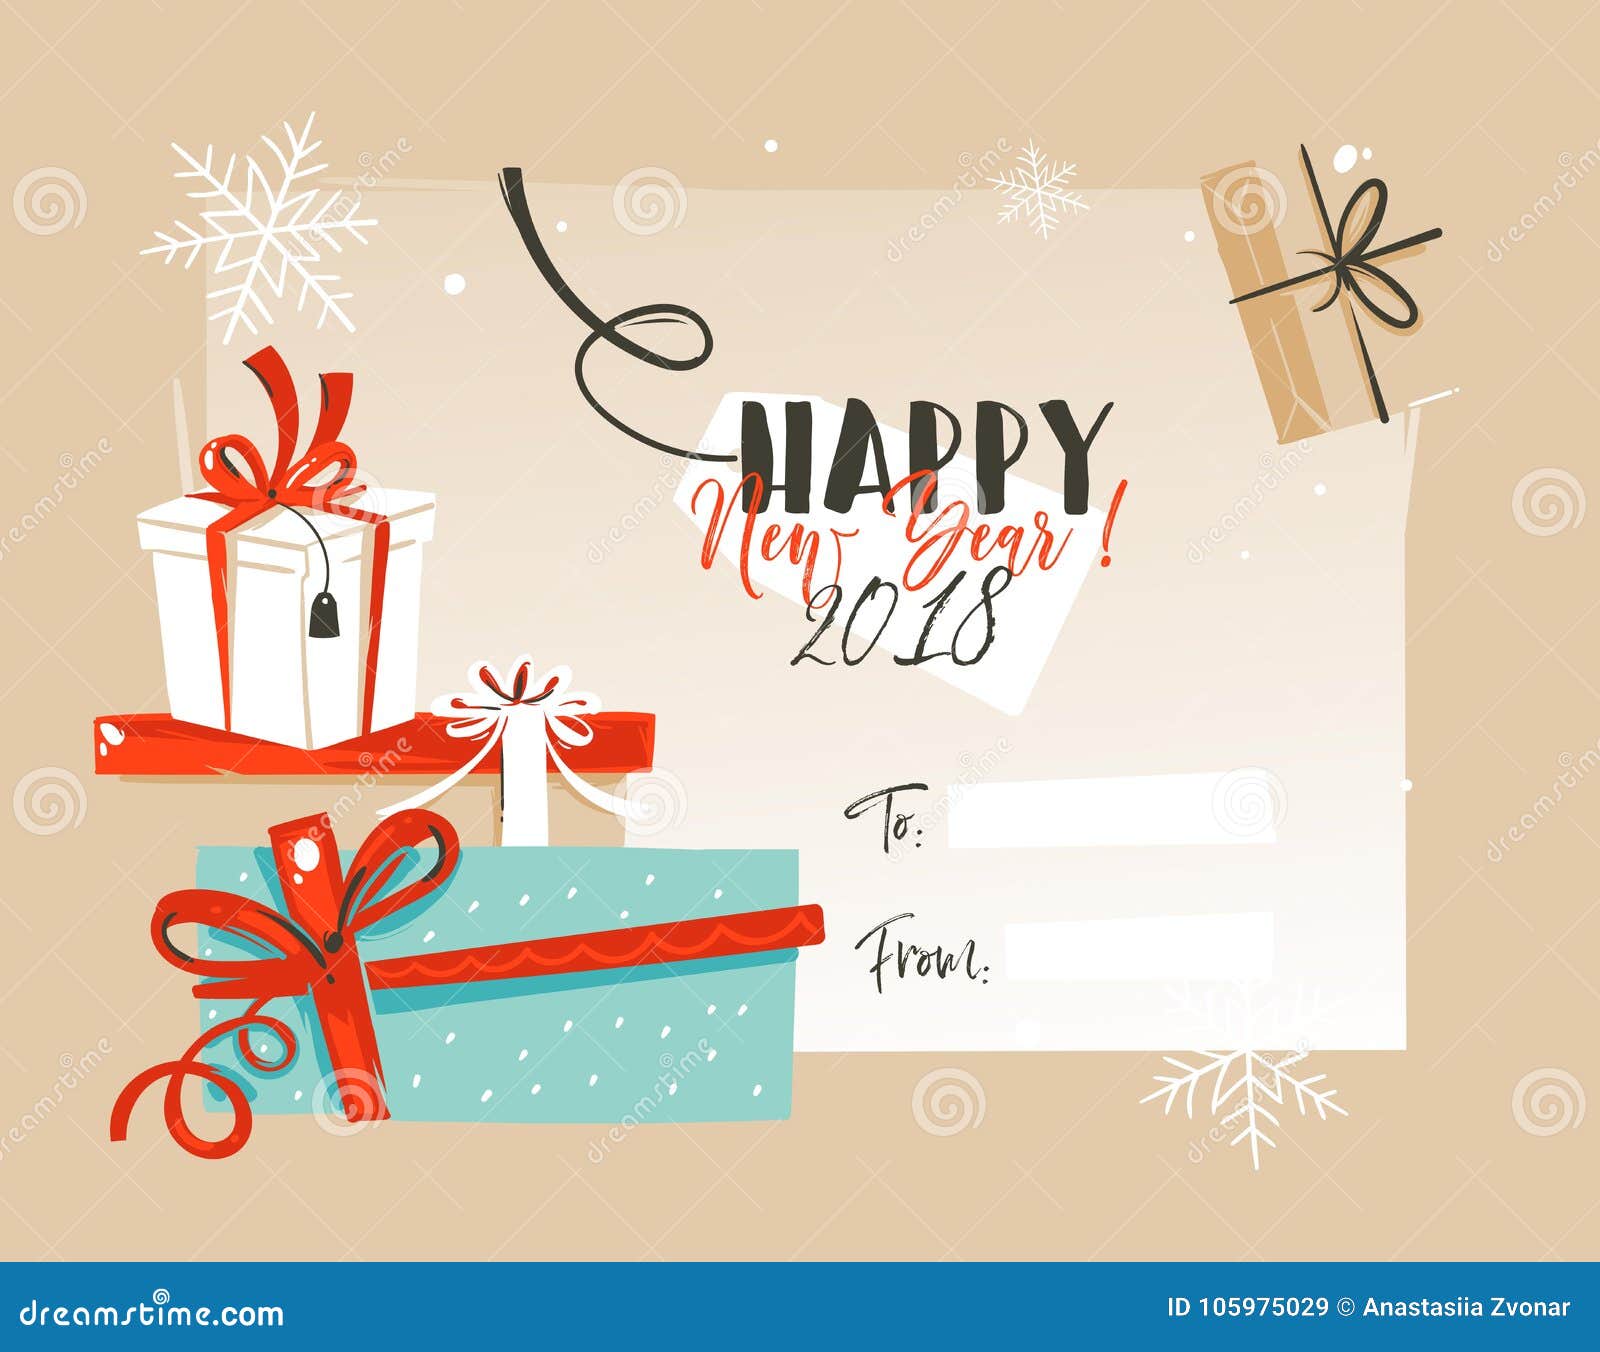 Happy New Years Card Template from thumbs.dreamstime.com